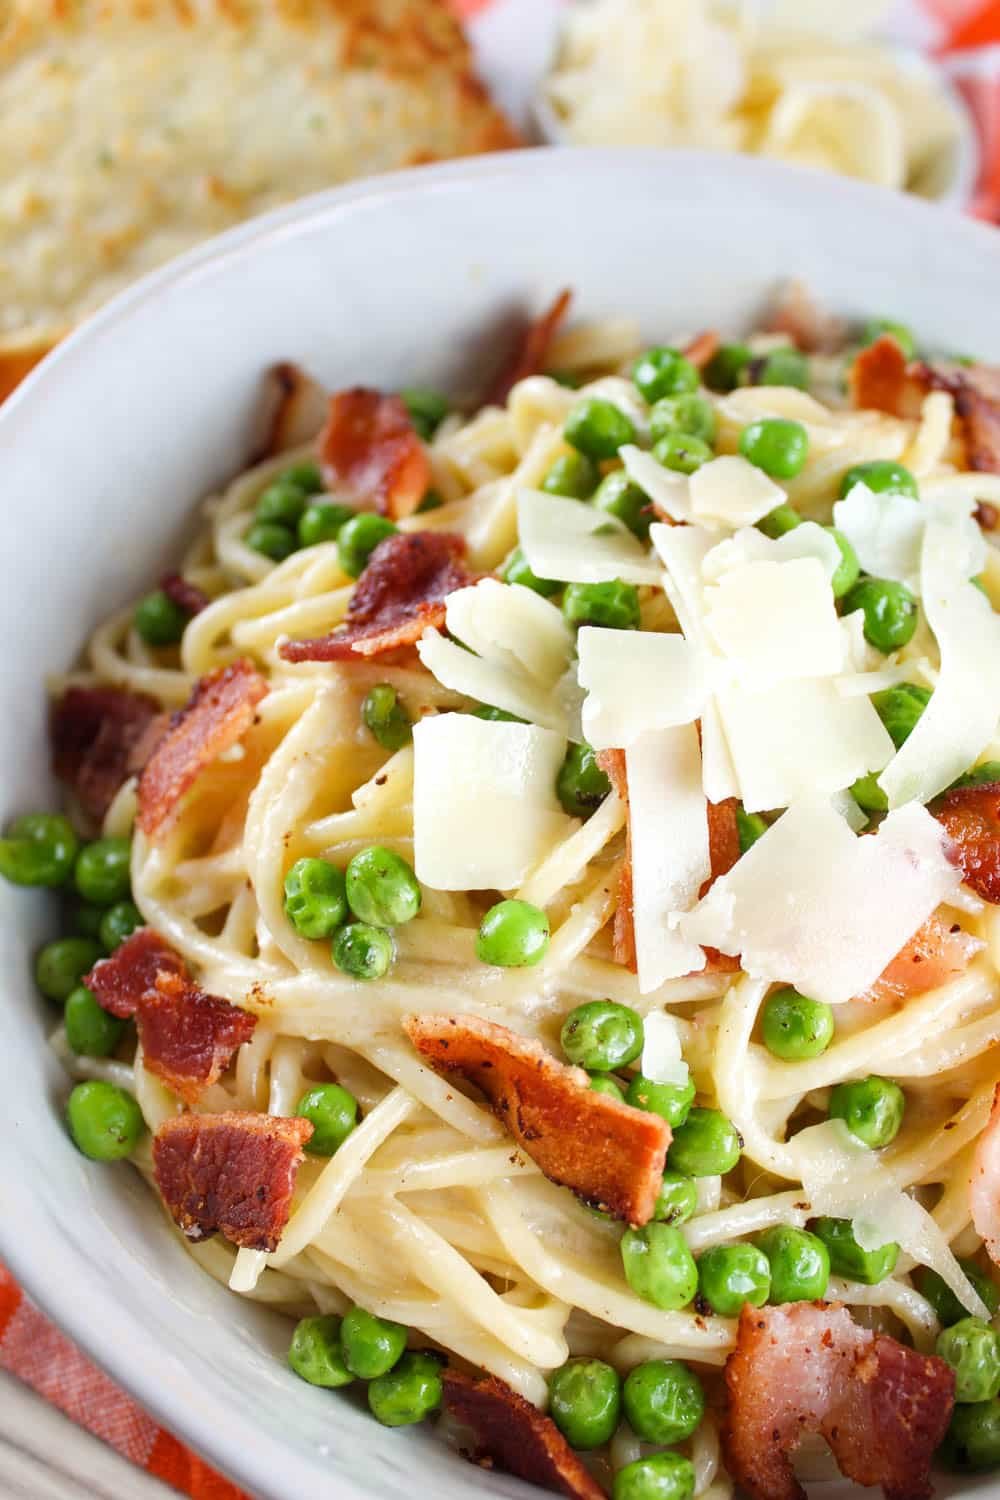 Cheesecake Factory's Pasta Carbonara recipe is creamy and on the table in less than 30 minutes! Spaghetti coated in a light carbonara sauce and topped with peas and thick cut bacon. It's my favorite!! via @foodhussy